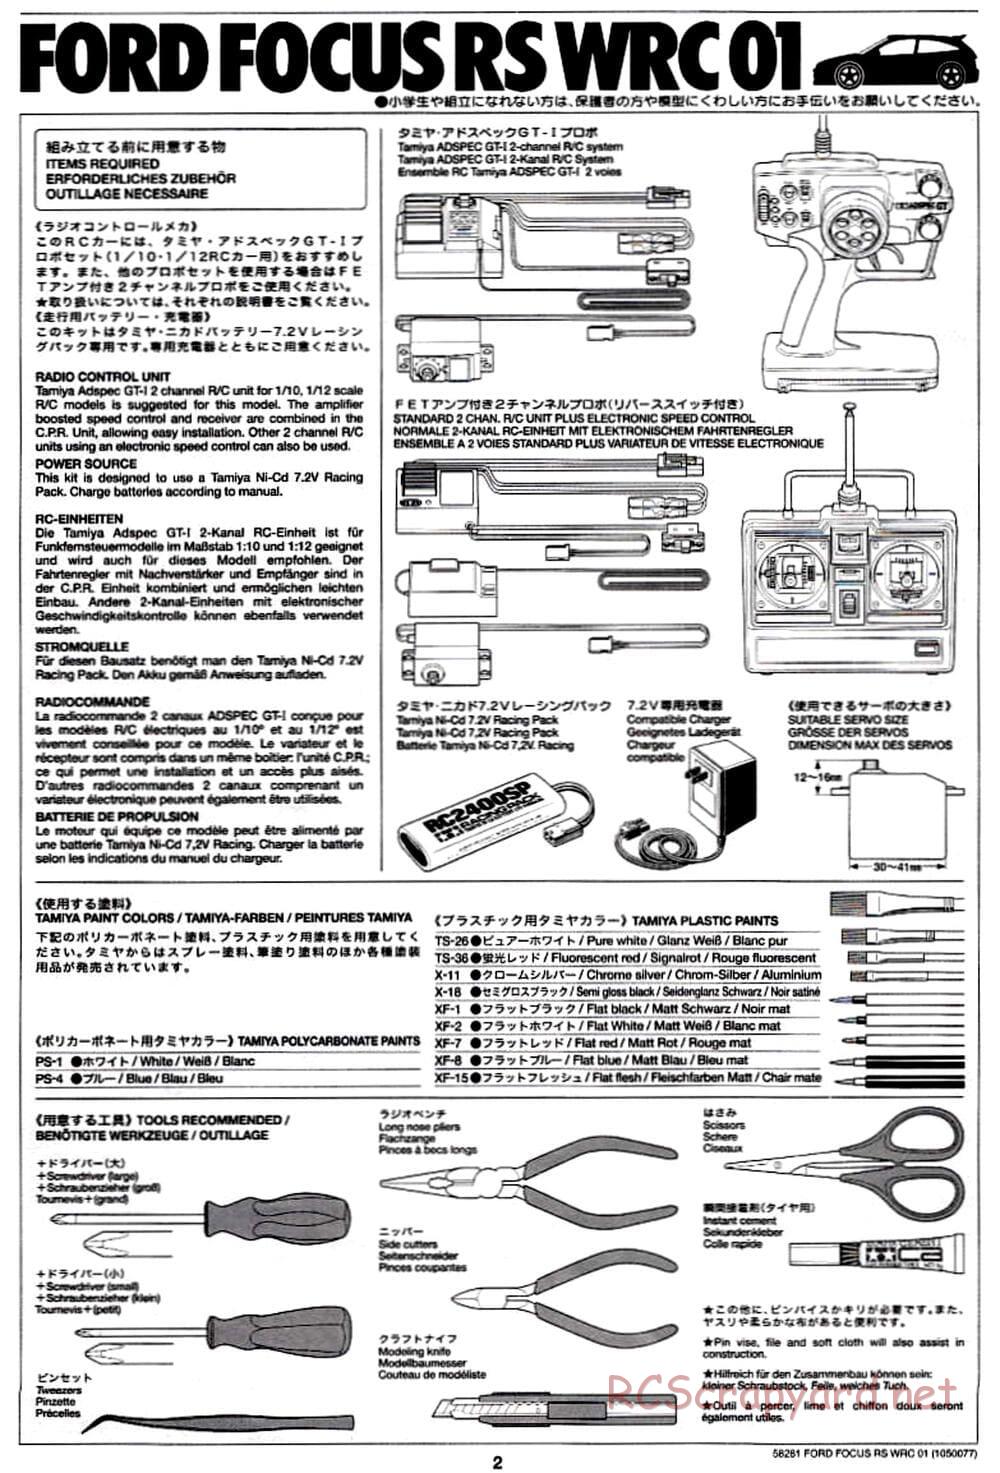 Tamiya - Ford Focus RS WRC 01 - TB-01 Chassis - Manual - Page 2